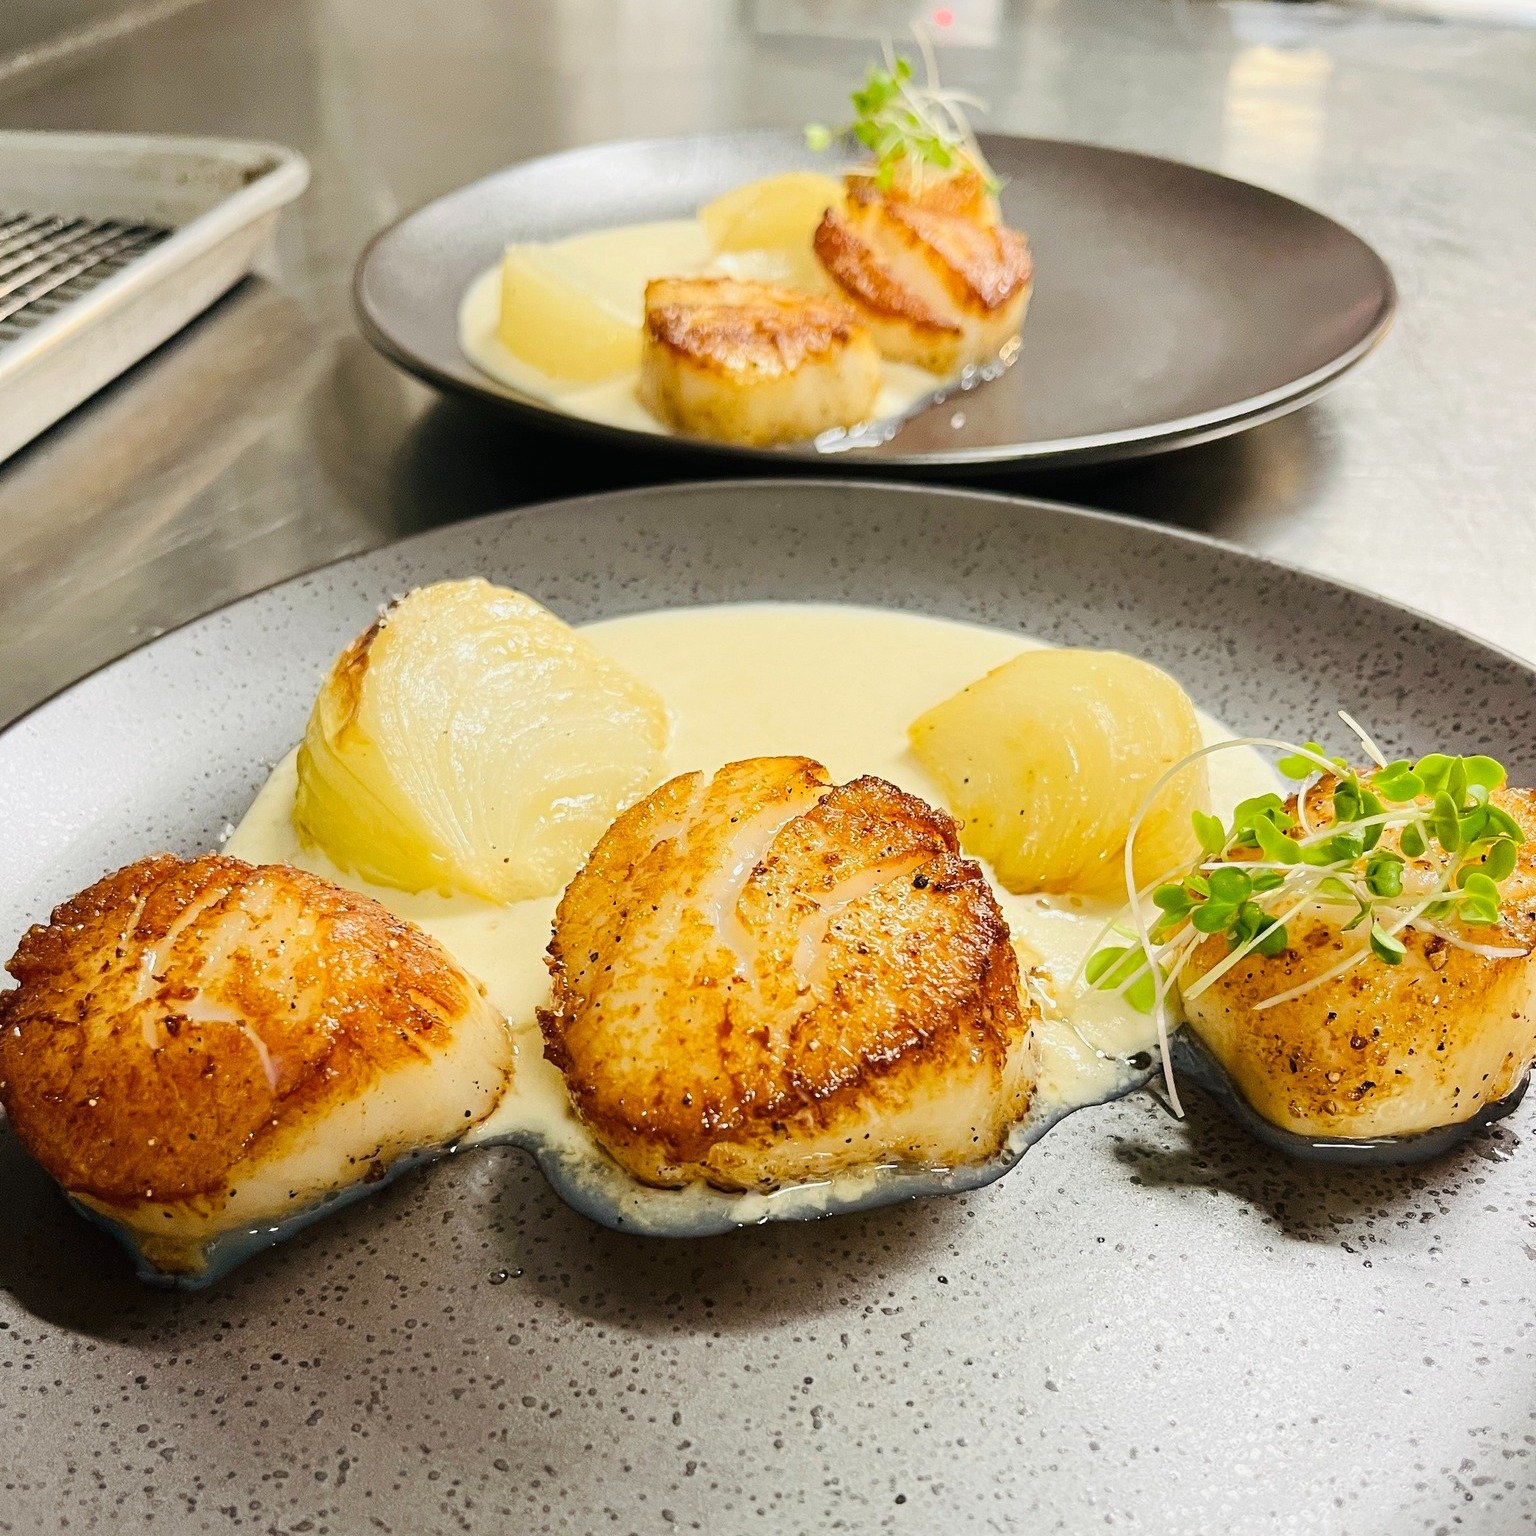 ✨Prepare to be delighted! ✨

This week our diver scallops are seared to golden perfection and served with a delicate onion soubise and roasted sweet onions. 

Each bite is a symphony of flavors that will transport you to a realm of gastronomic bliss.